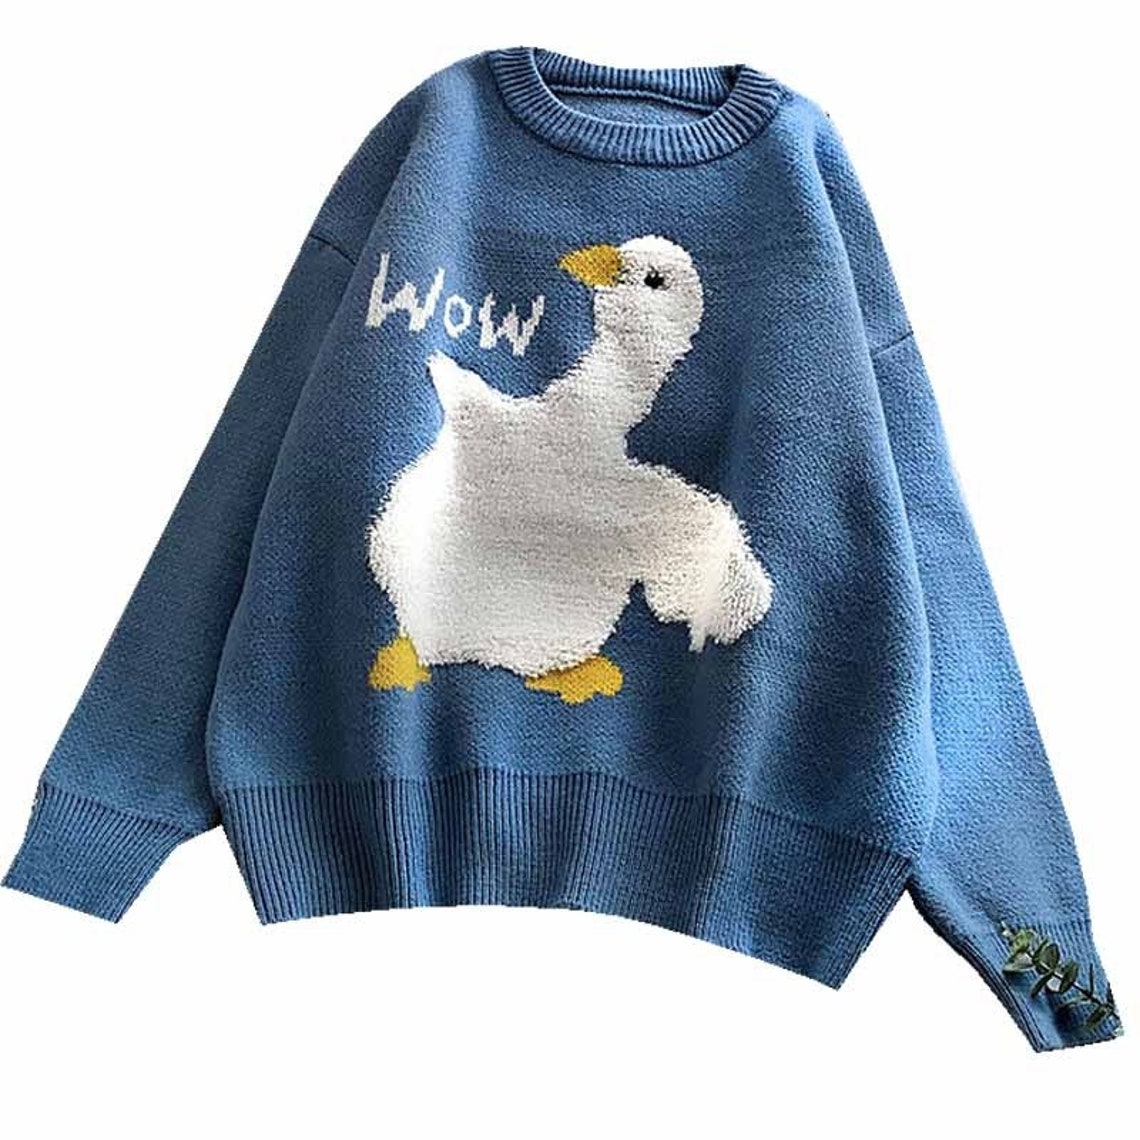 Goose Wow UNISEX Sweater Jumper Long Sleeve 2021 Knitted | Etsy